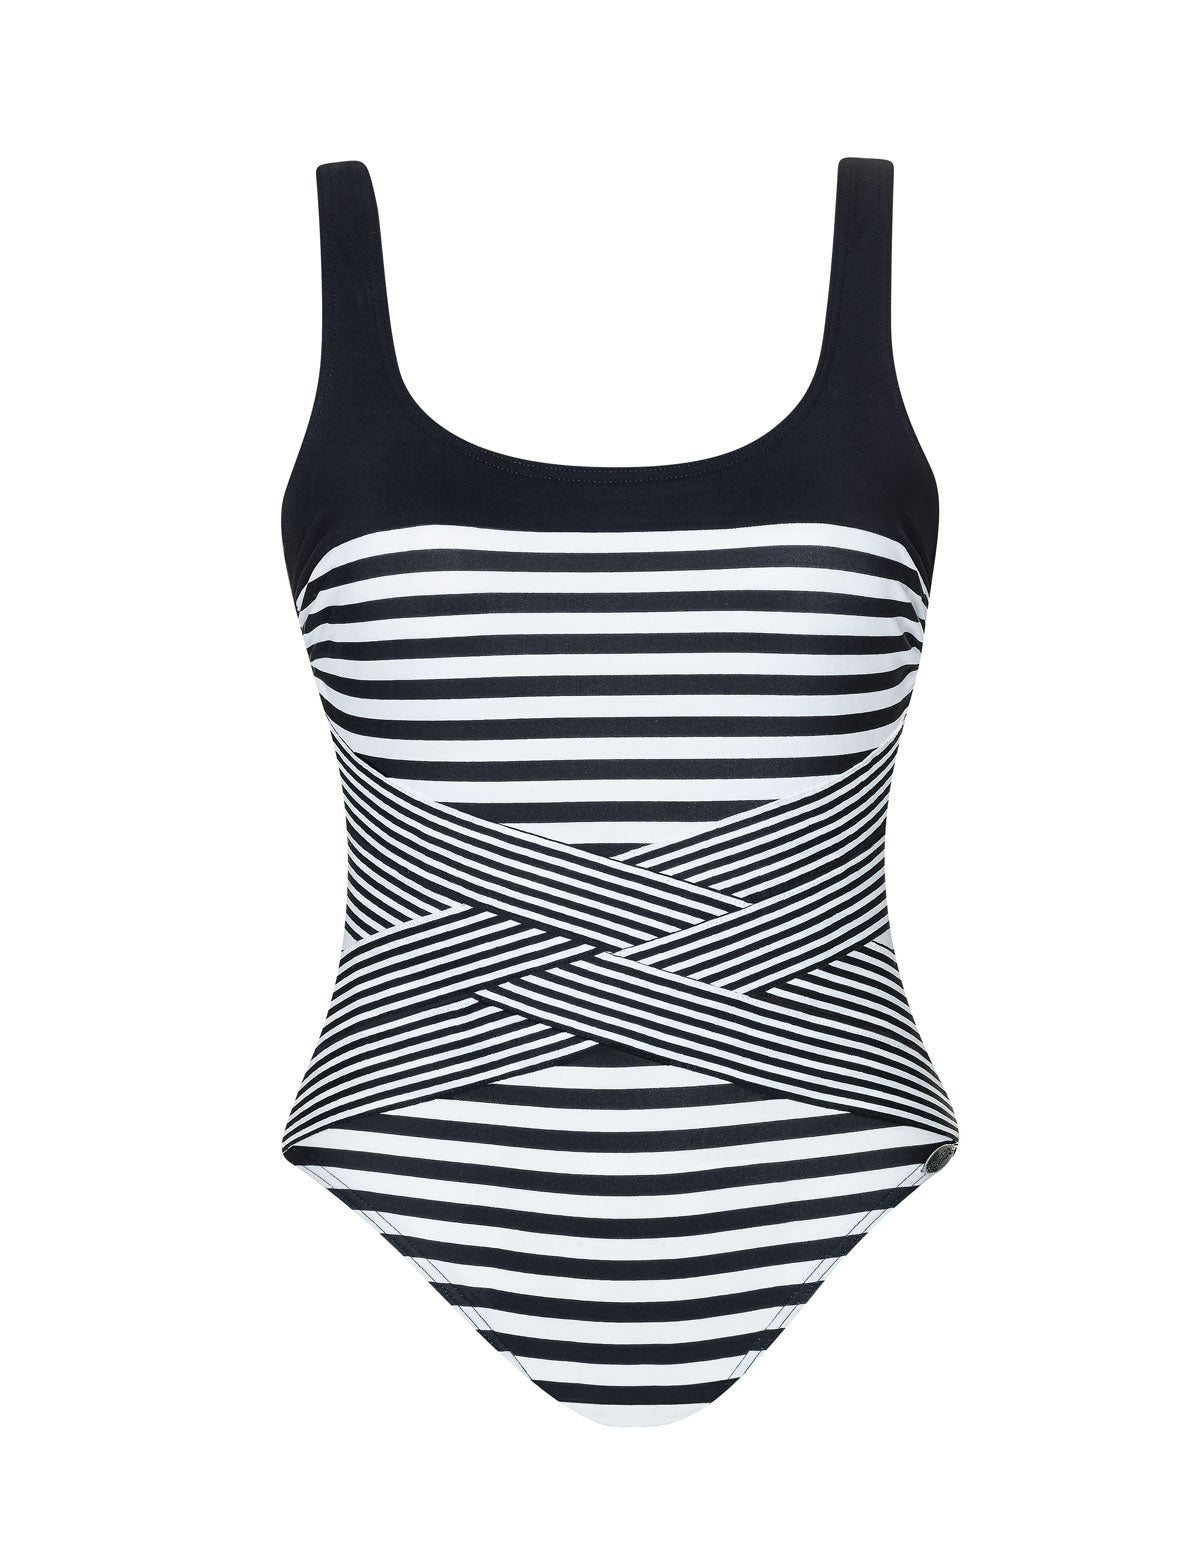 Sunflair 22235-005 Black Striped Swimsuit